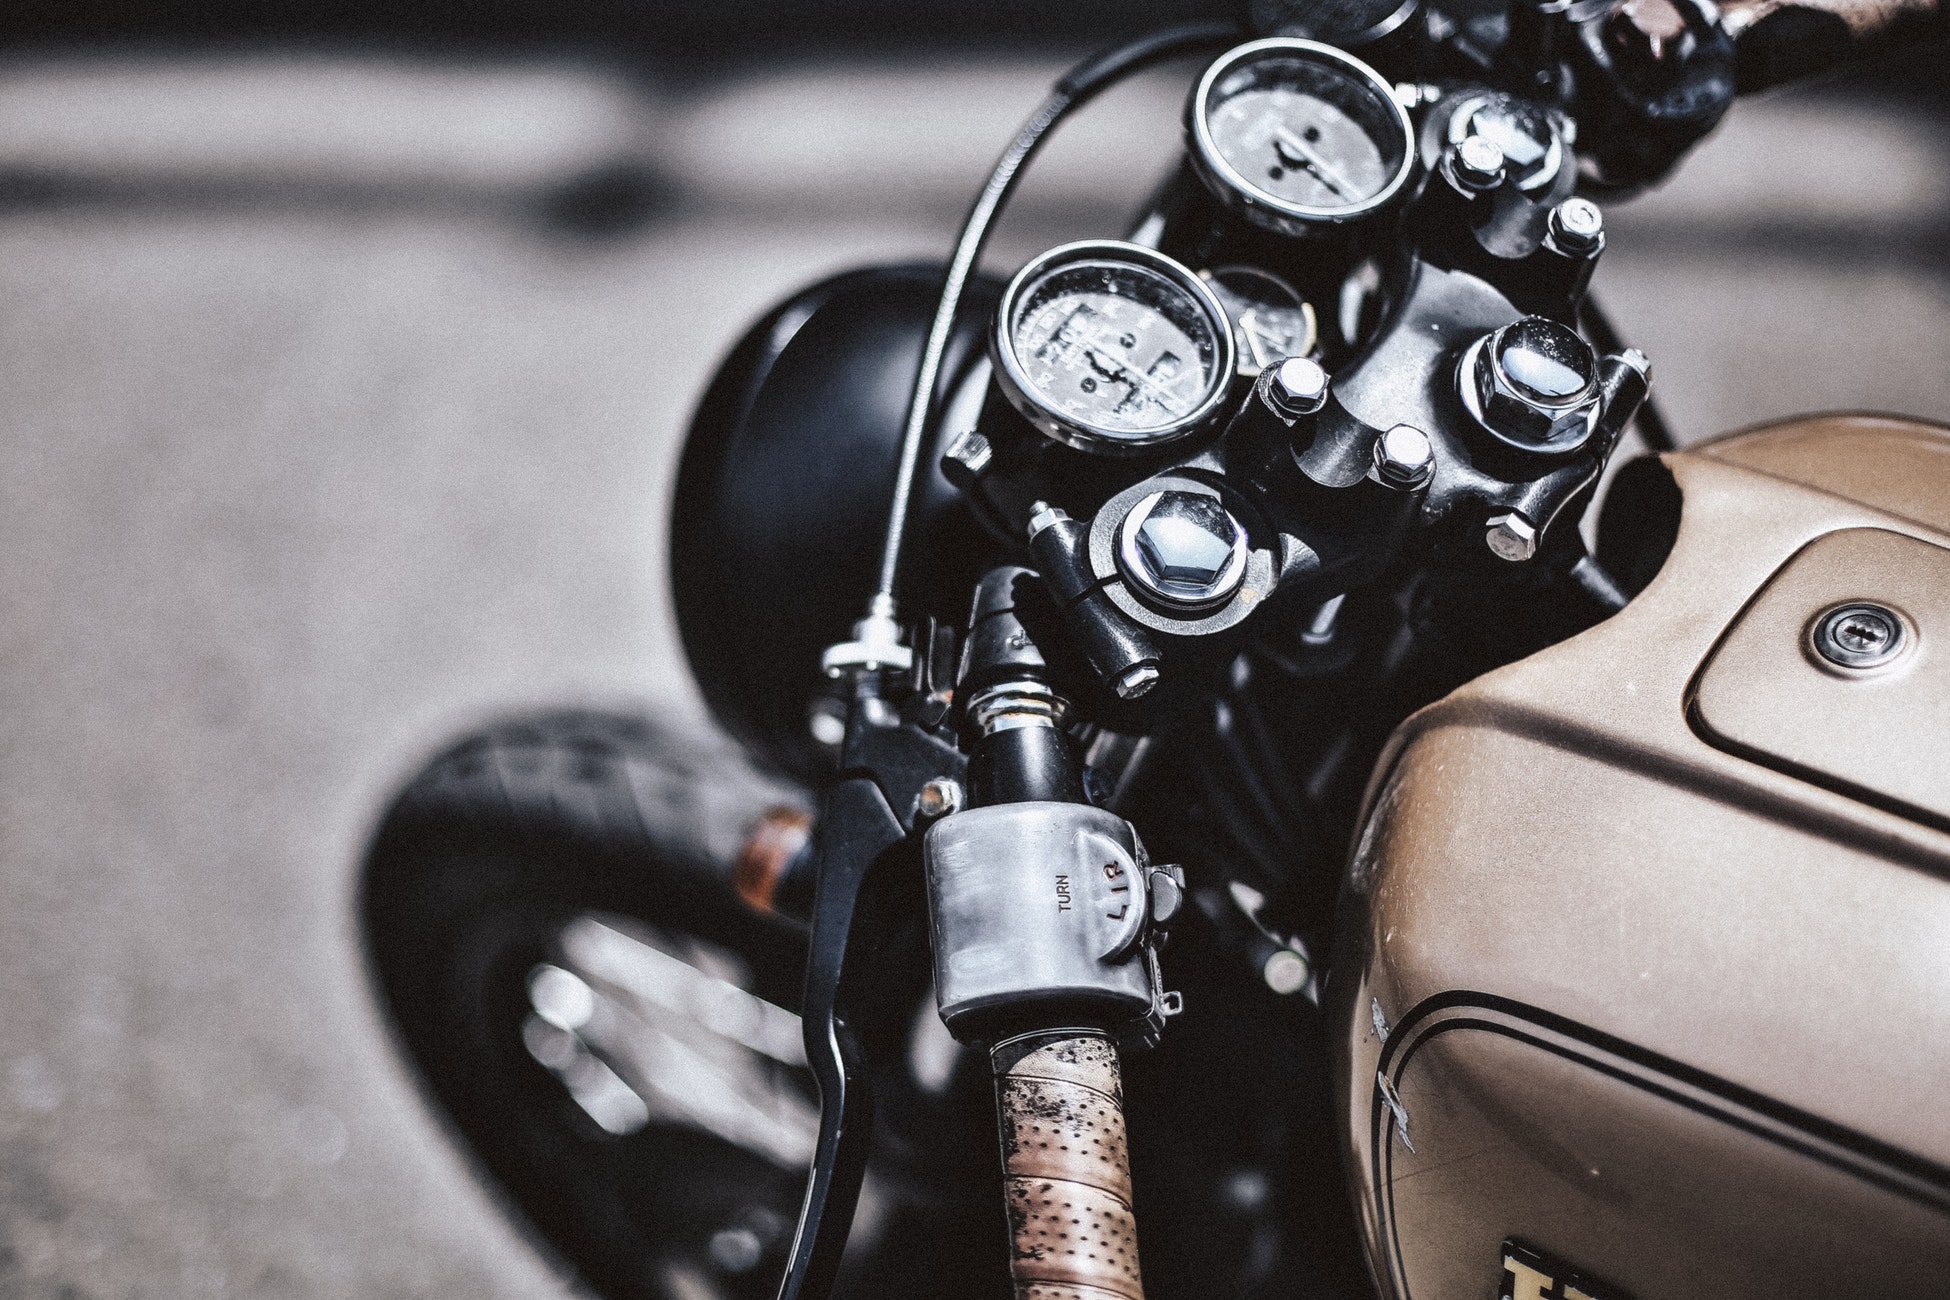 How To Get A Motorcycle License In Illinois [Ultimate Guide]